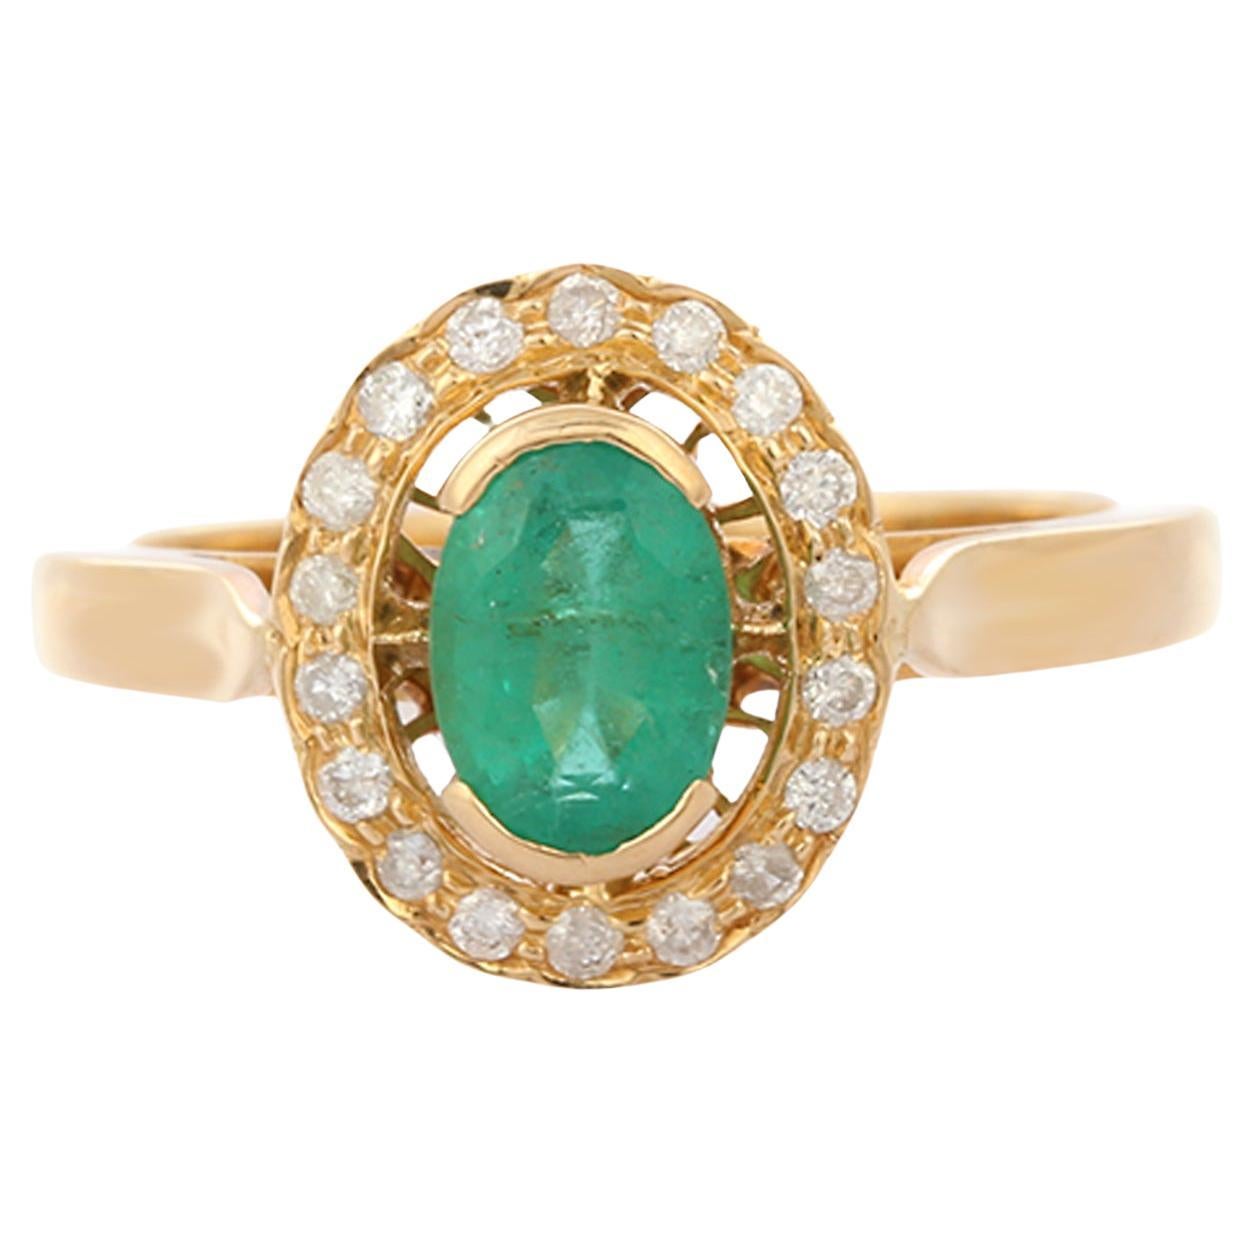 For Sale:  Contemporary Half Bezel Set Emerald and Halo Diamond Ring in 18K Yellow Gold